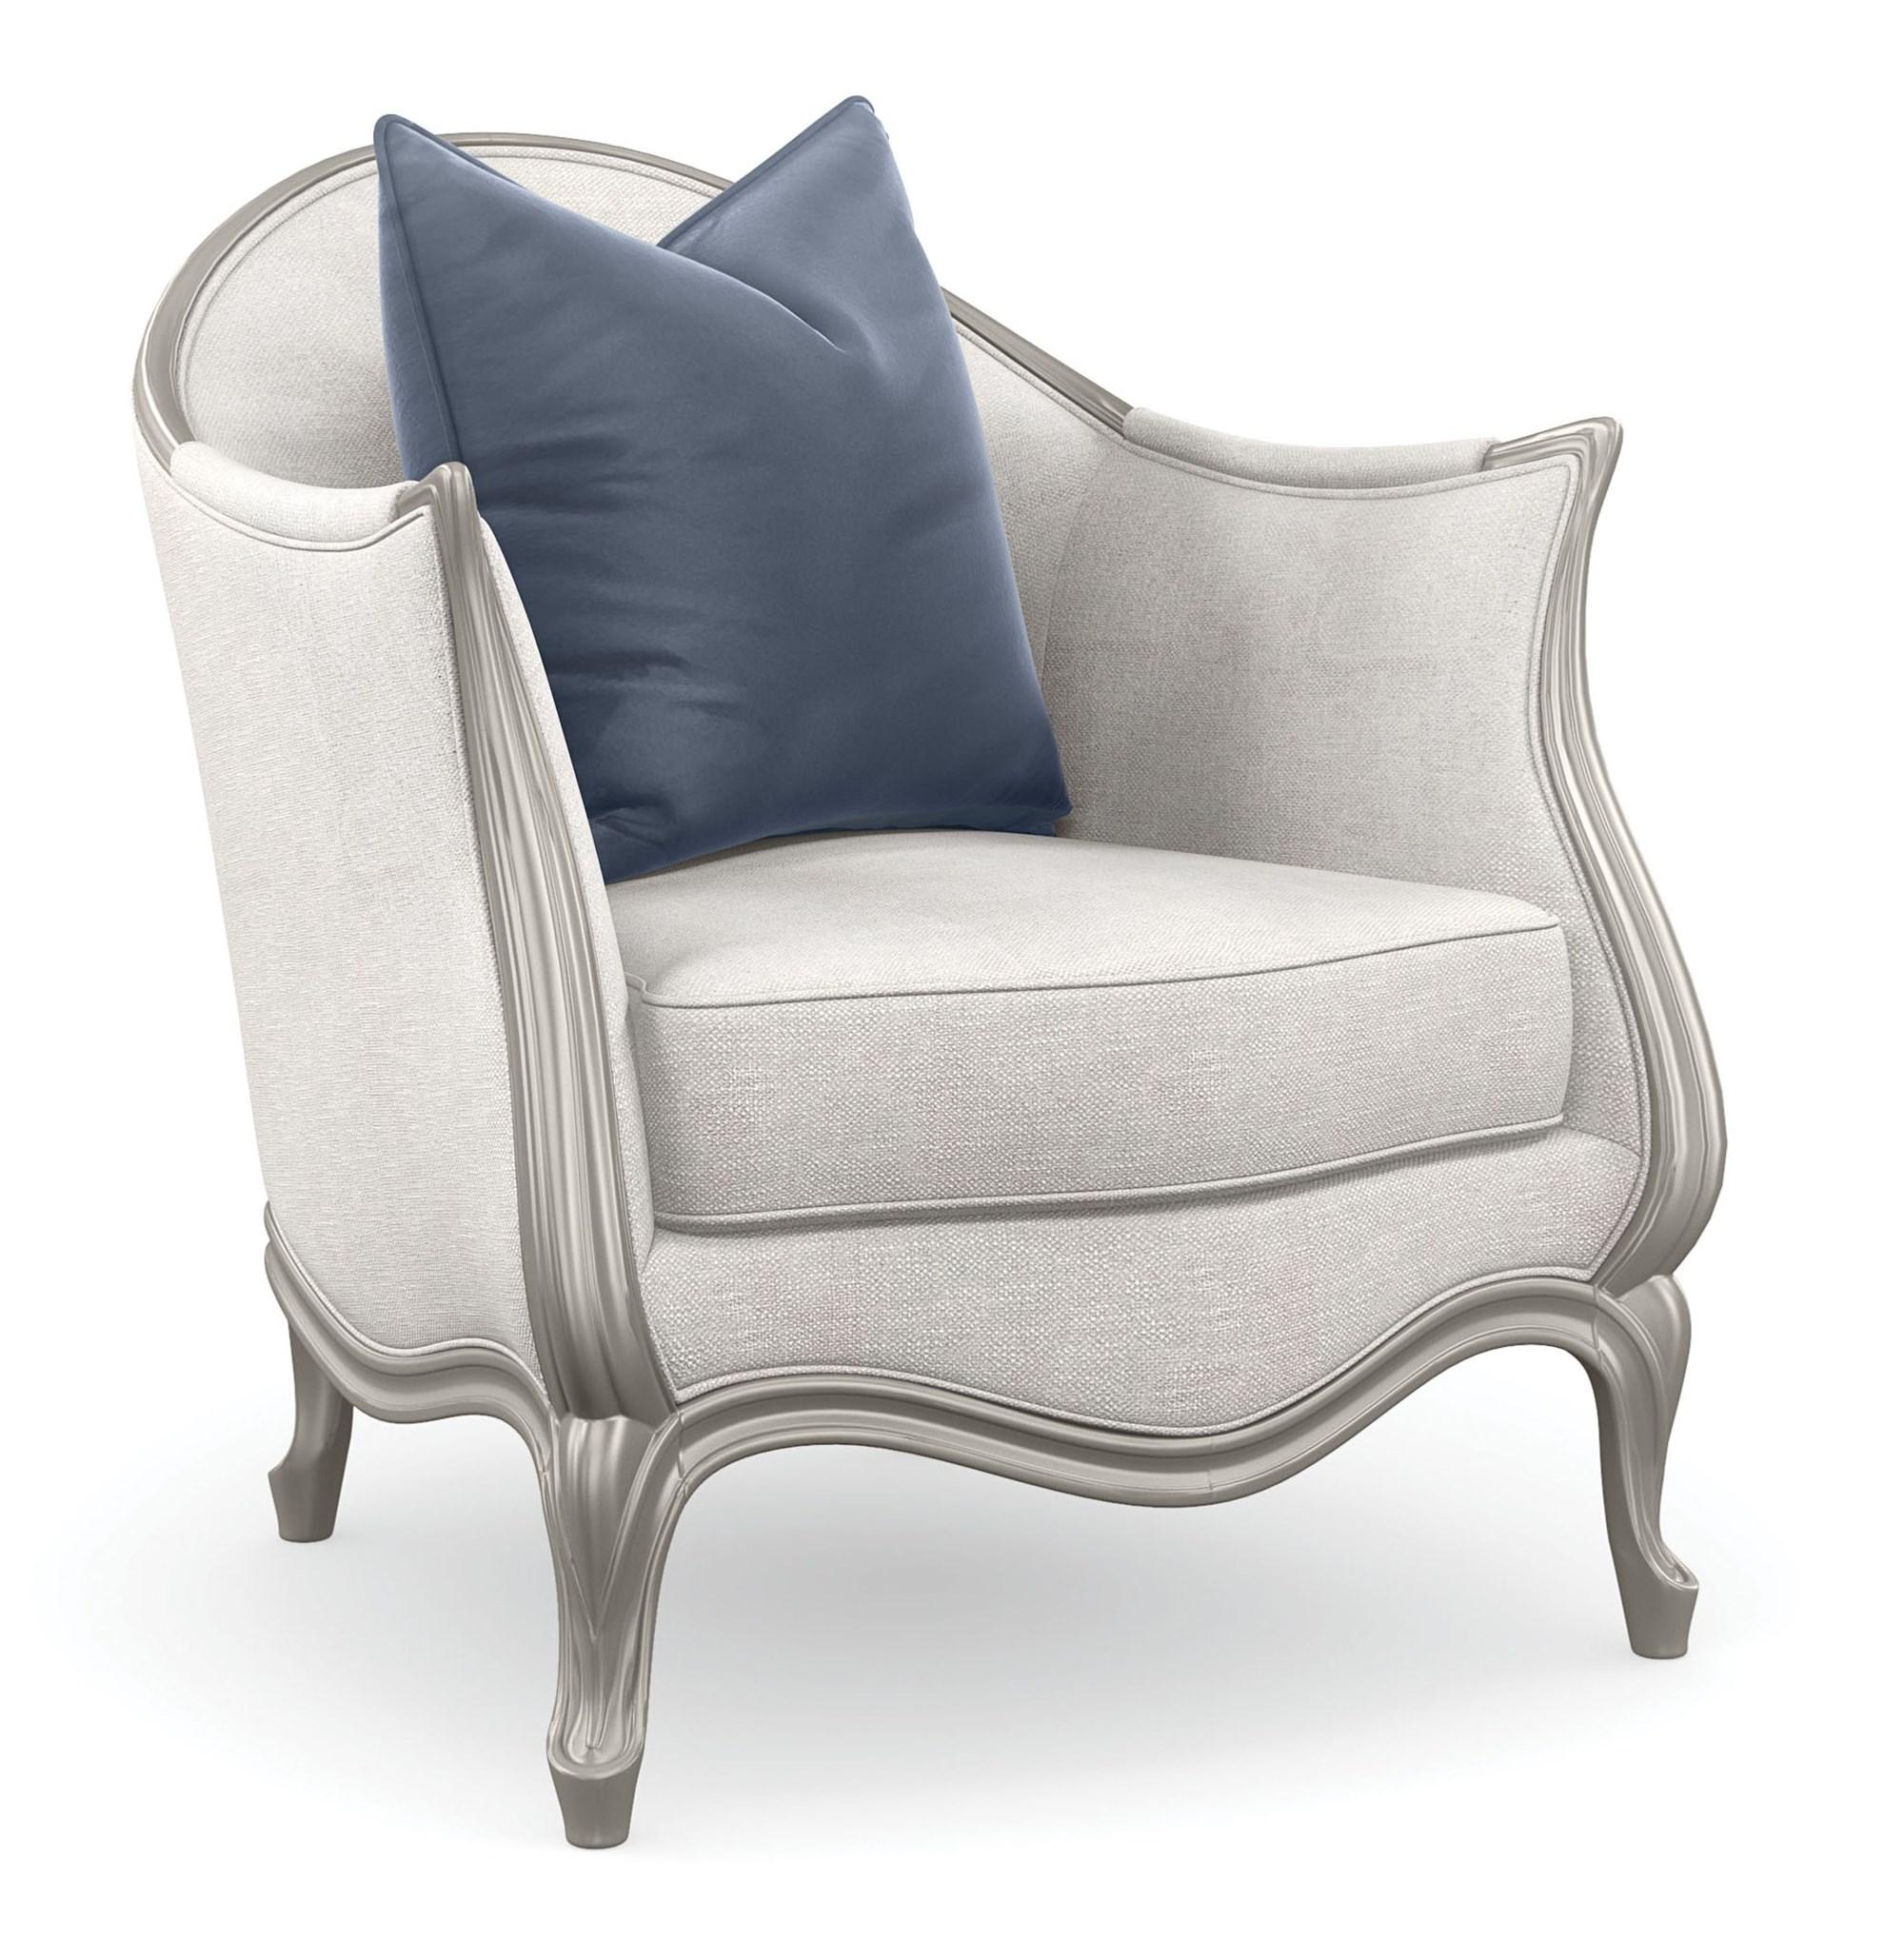 Classic Accent Chair SPECIAL INVITATION CHAIR UPH-020-133-A in Light Beige Fabric